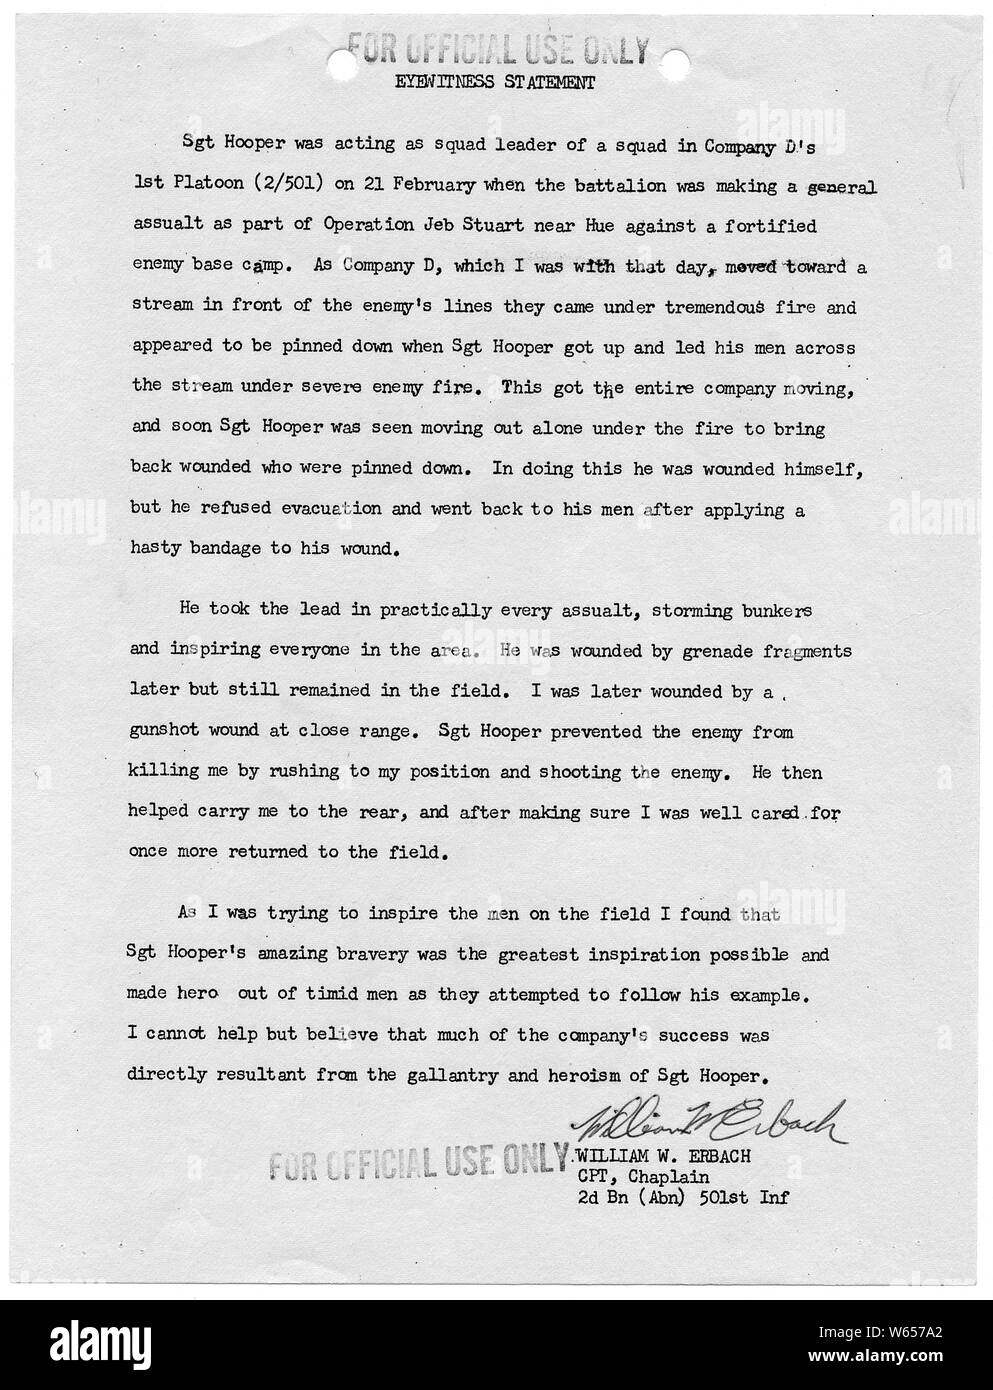 Eyewitness Statement of William W. Erbach, Company D, Second Battalion (Airborne), 501st Infantry, 101st Airborne Division; Scope and content:  This eyewitness statement contains evidence of the actions of Staff Sergeant Joe R. Hooper, who distinguished himself on 21 February 1968 in the battle of Hue, Republic of Vietnam. As a result of this statement, and statements of others, Staff Sergeant Hooper was awarded the Congressional Medal of Honor. In an extraordinary occurrence, Staff Sergeant Clifford C. Sims of the same company earned the Congressional Medal of Honor on the same day. Stock Photo